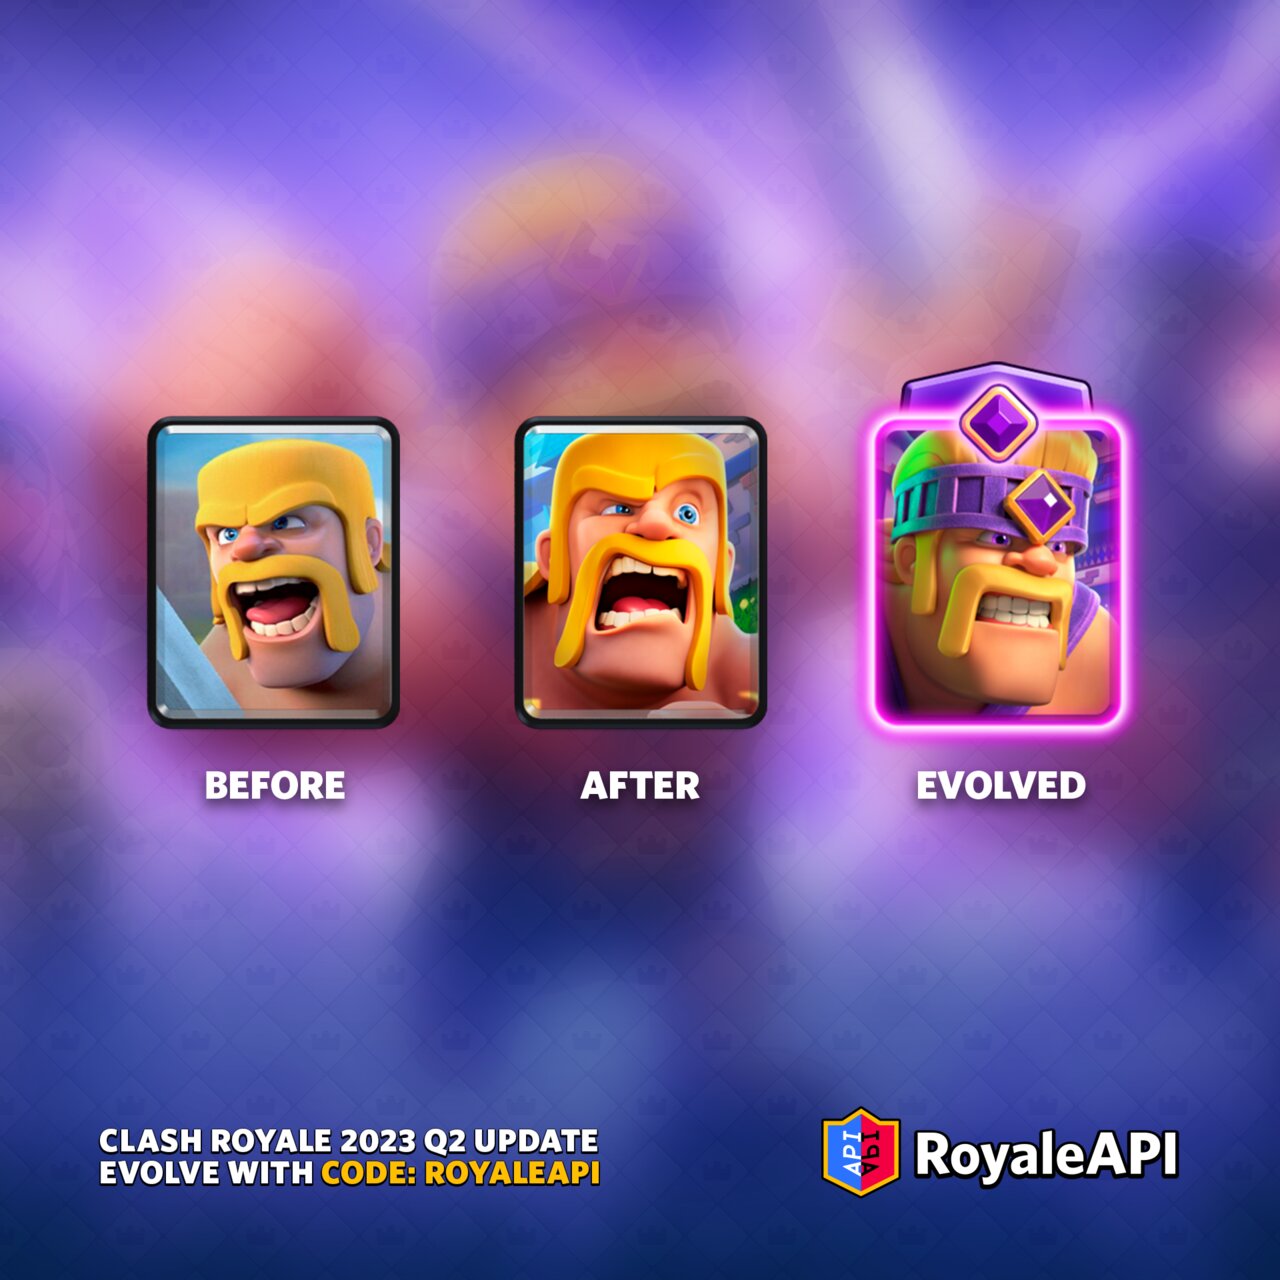 More - Clash Royale 2023 Q2 Summer Update